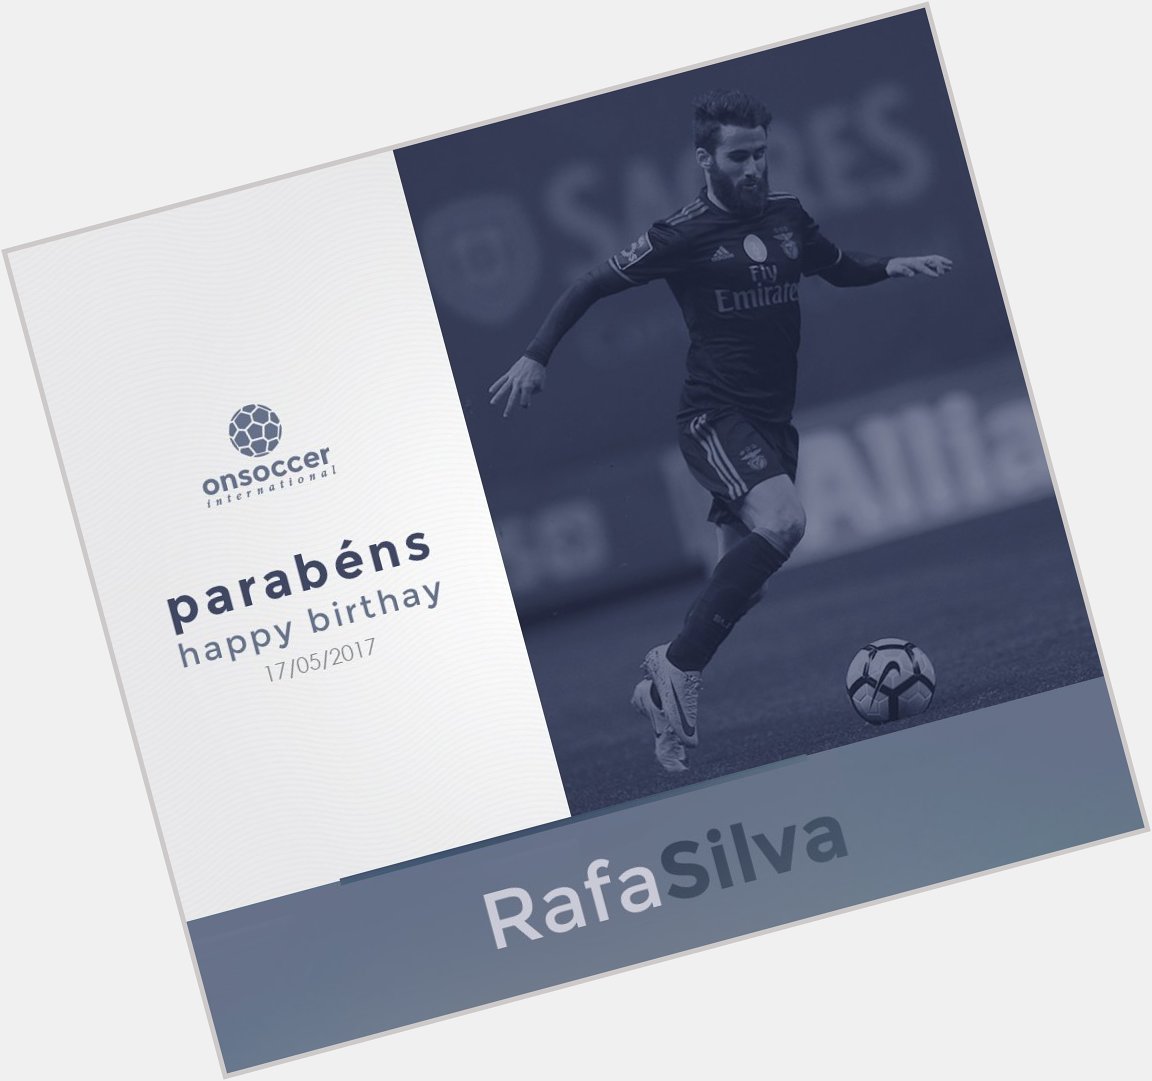 Happy birthday Rafa Silva! OnSoccer wishes a day of happiness and a life full of success. 